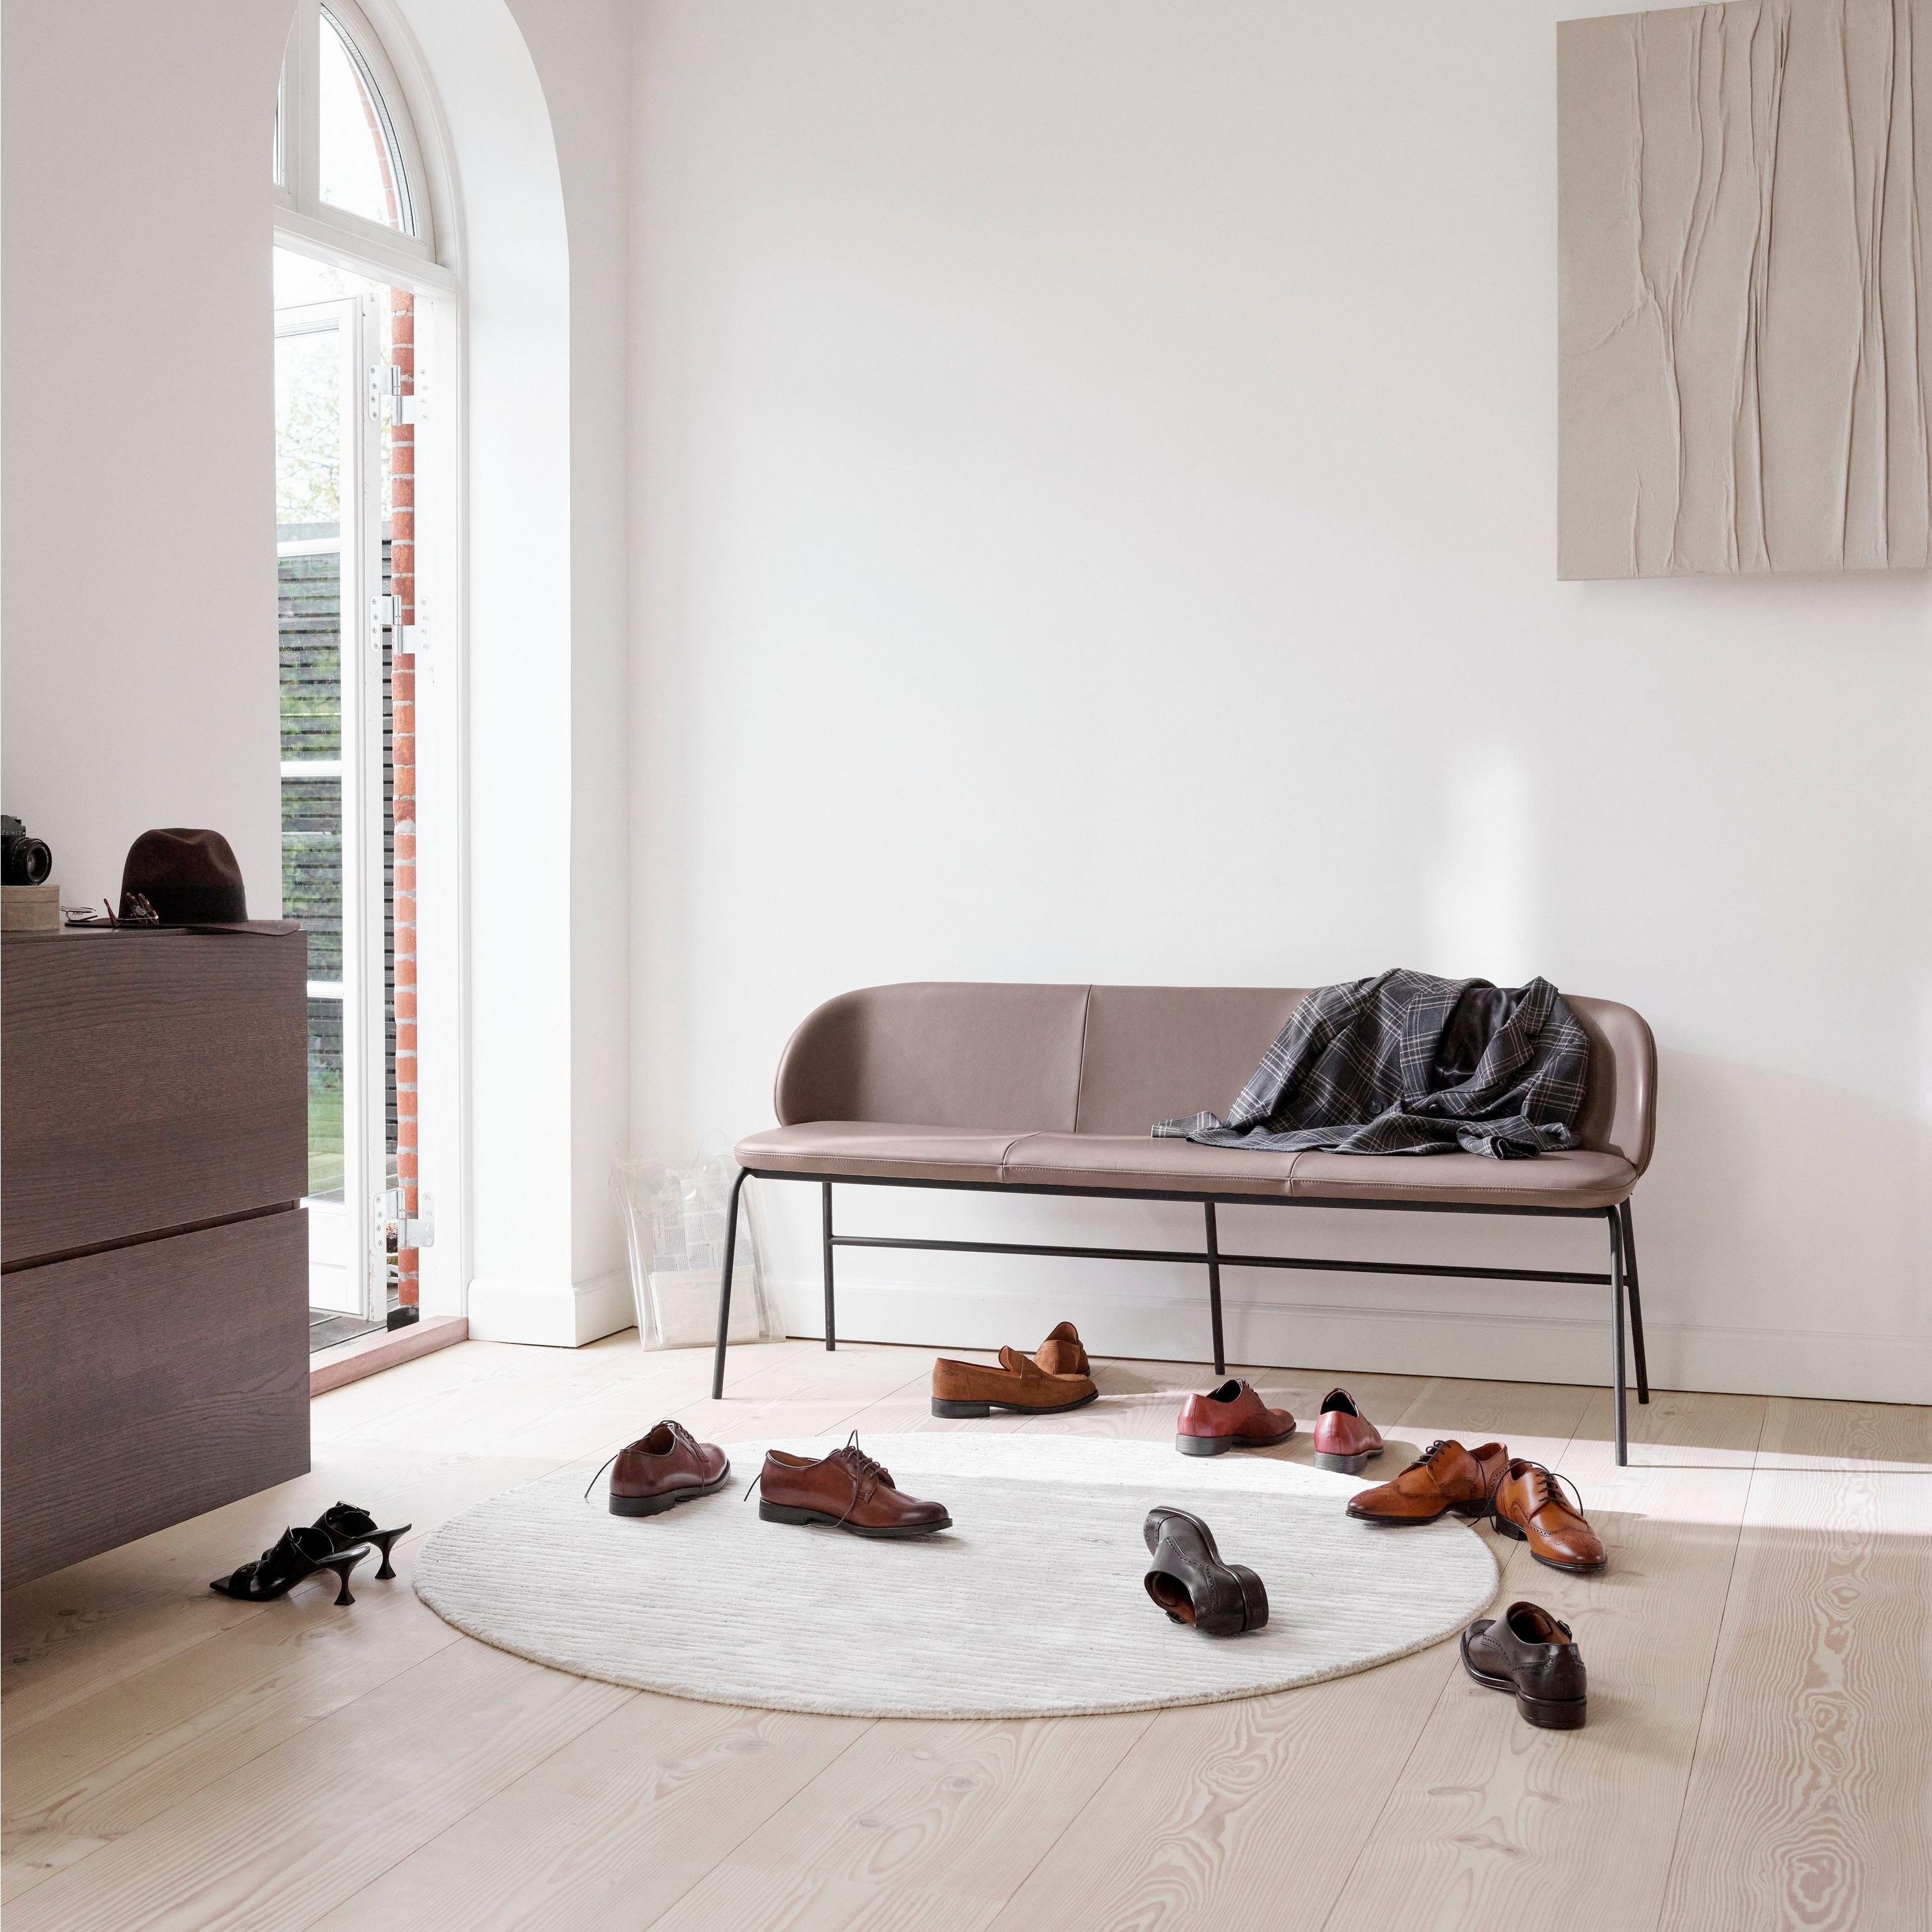 Leather bench in a bright room with arched window, shoes on floor and wooden art.